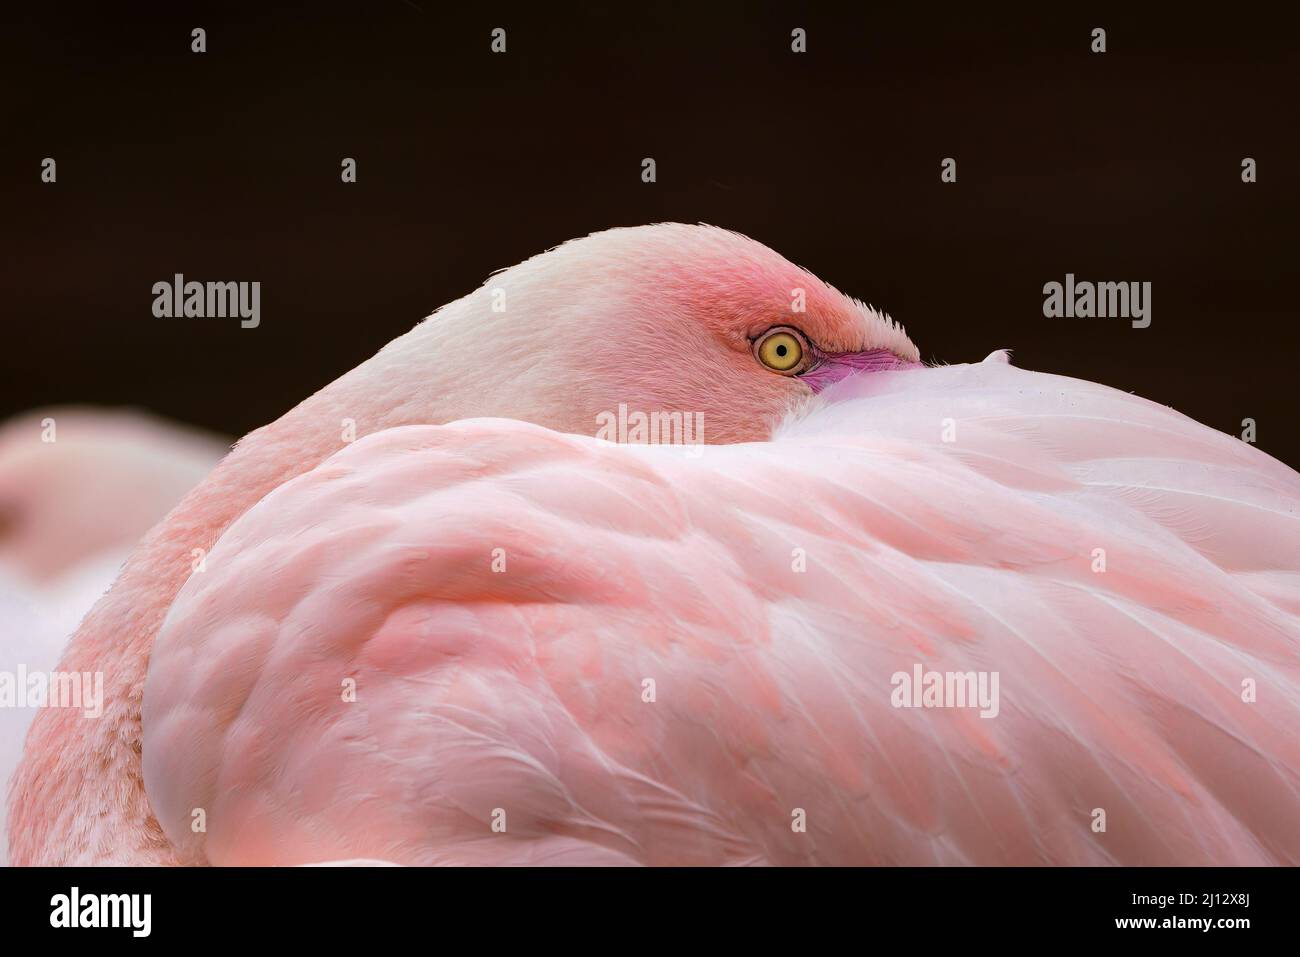 Greater flamingo, Phoenicopterus roseus. Close up detail of head and eye. Stock Photo